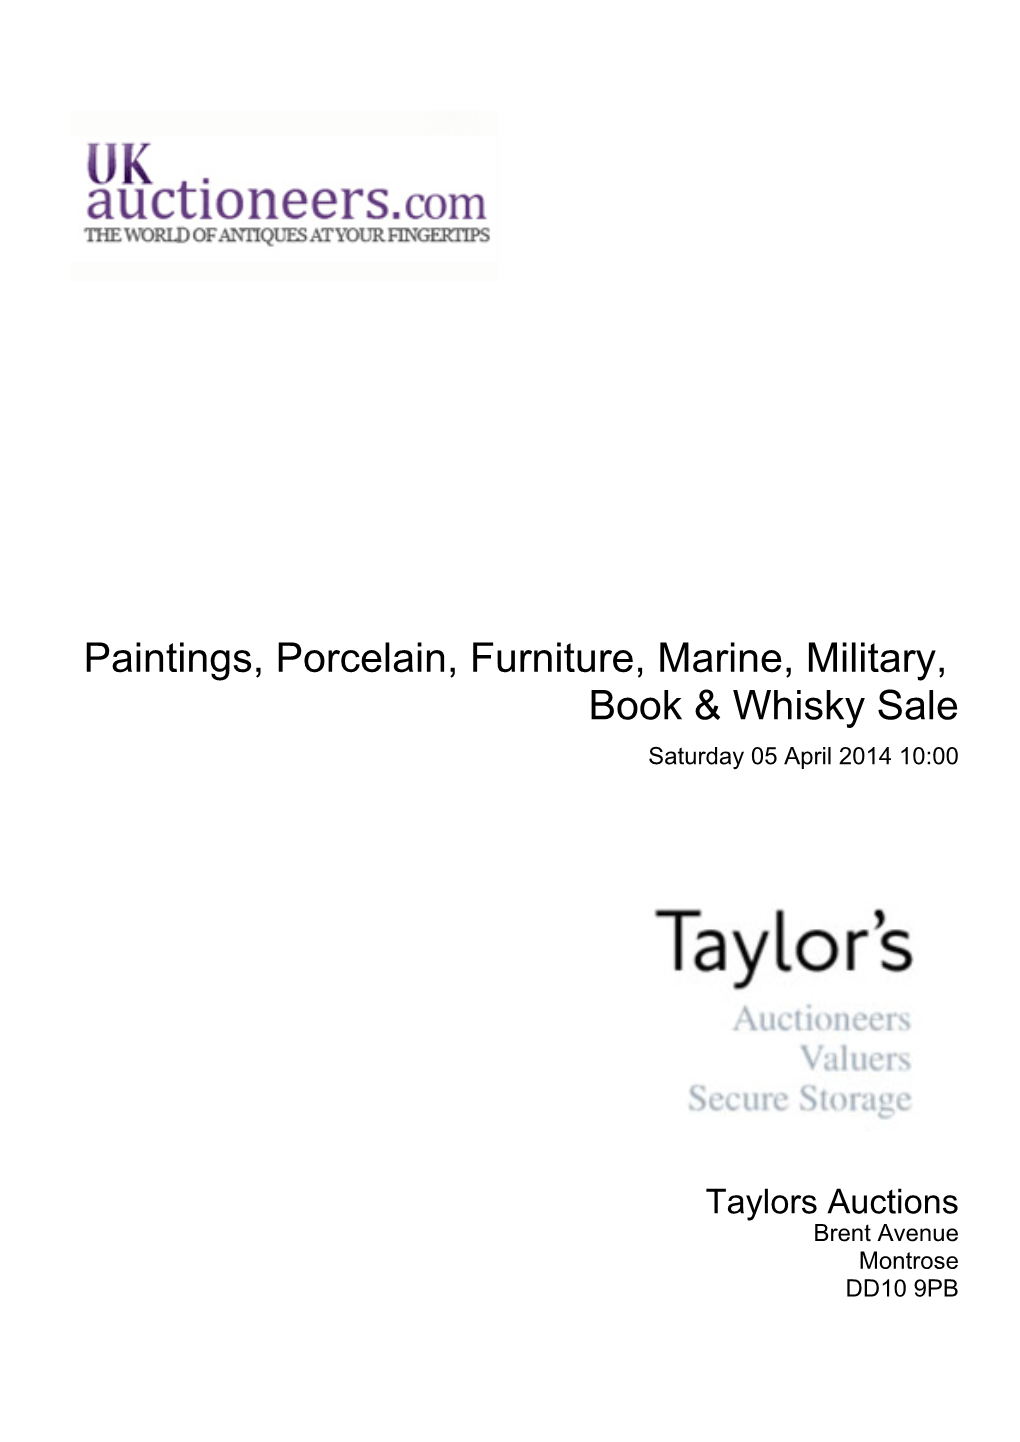 Paintings, Porcelain, Furniture, Marine, Military, Book & Whisky Sale